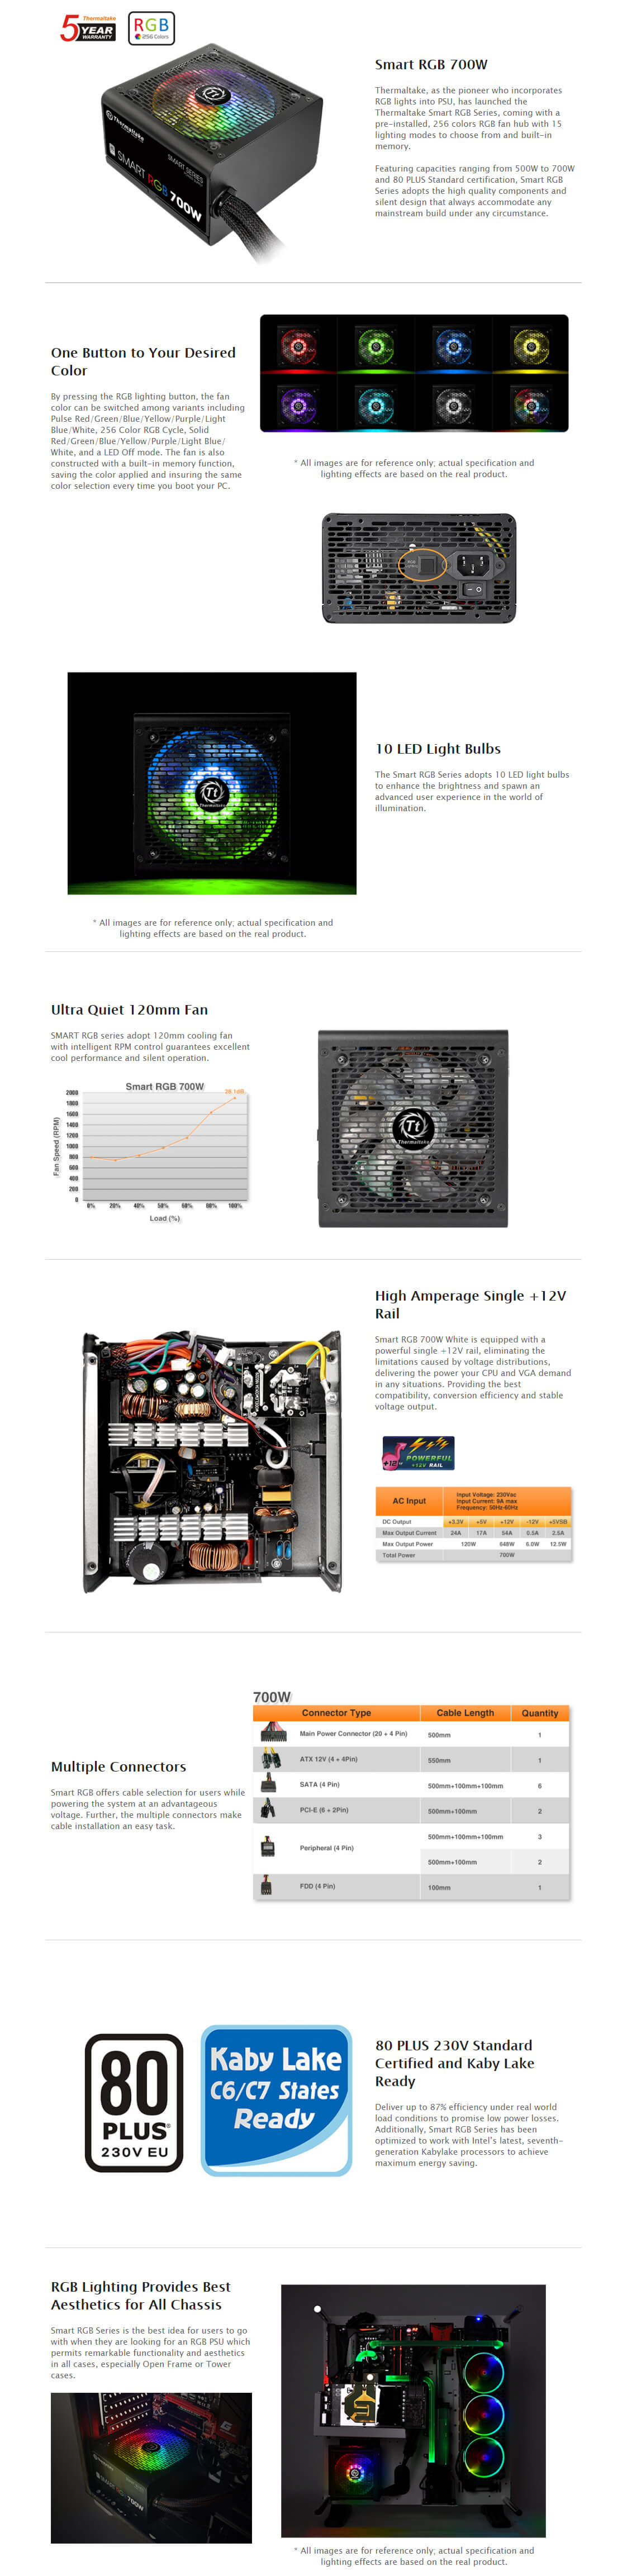 A large marketing image providing additional information about the product Thermaltake Smart RGB - 700W White ATX PSU - Additional alt info not provided